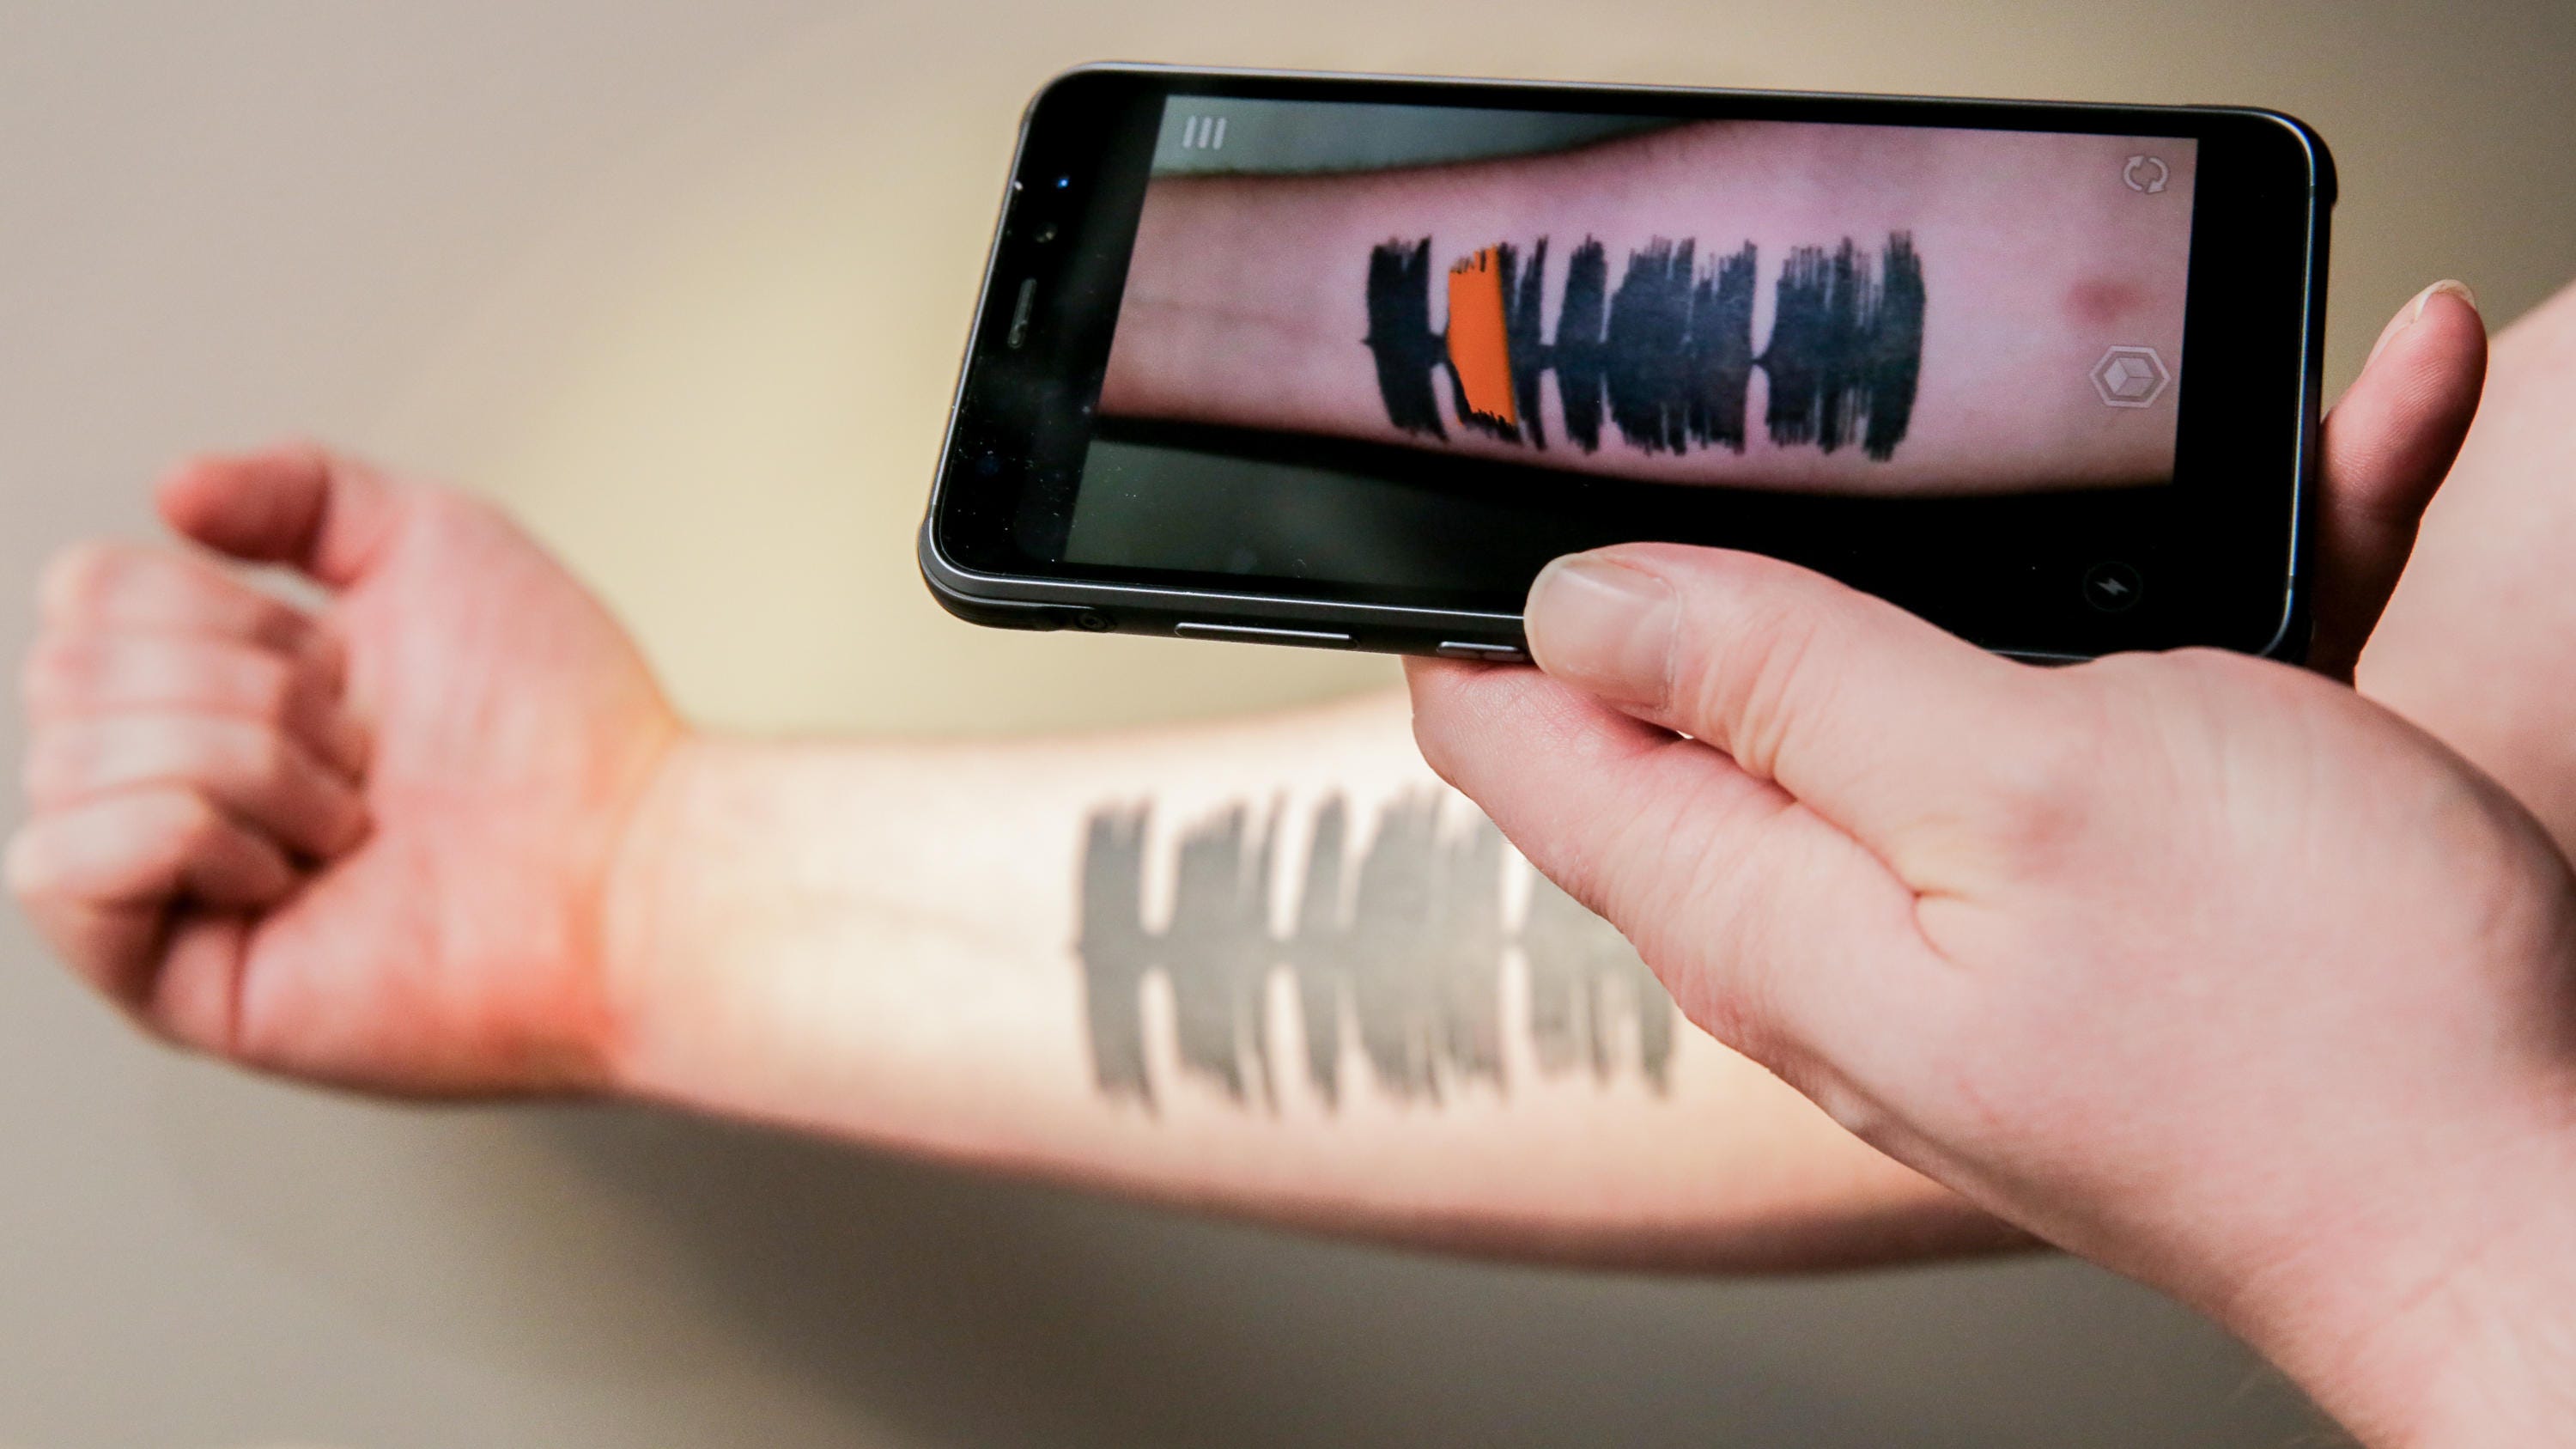 Skin Motion app turns my tattoo into sound waves - CNET